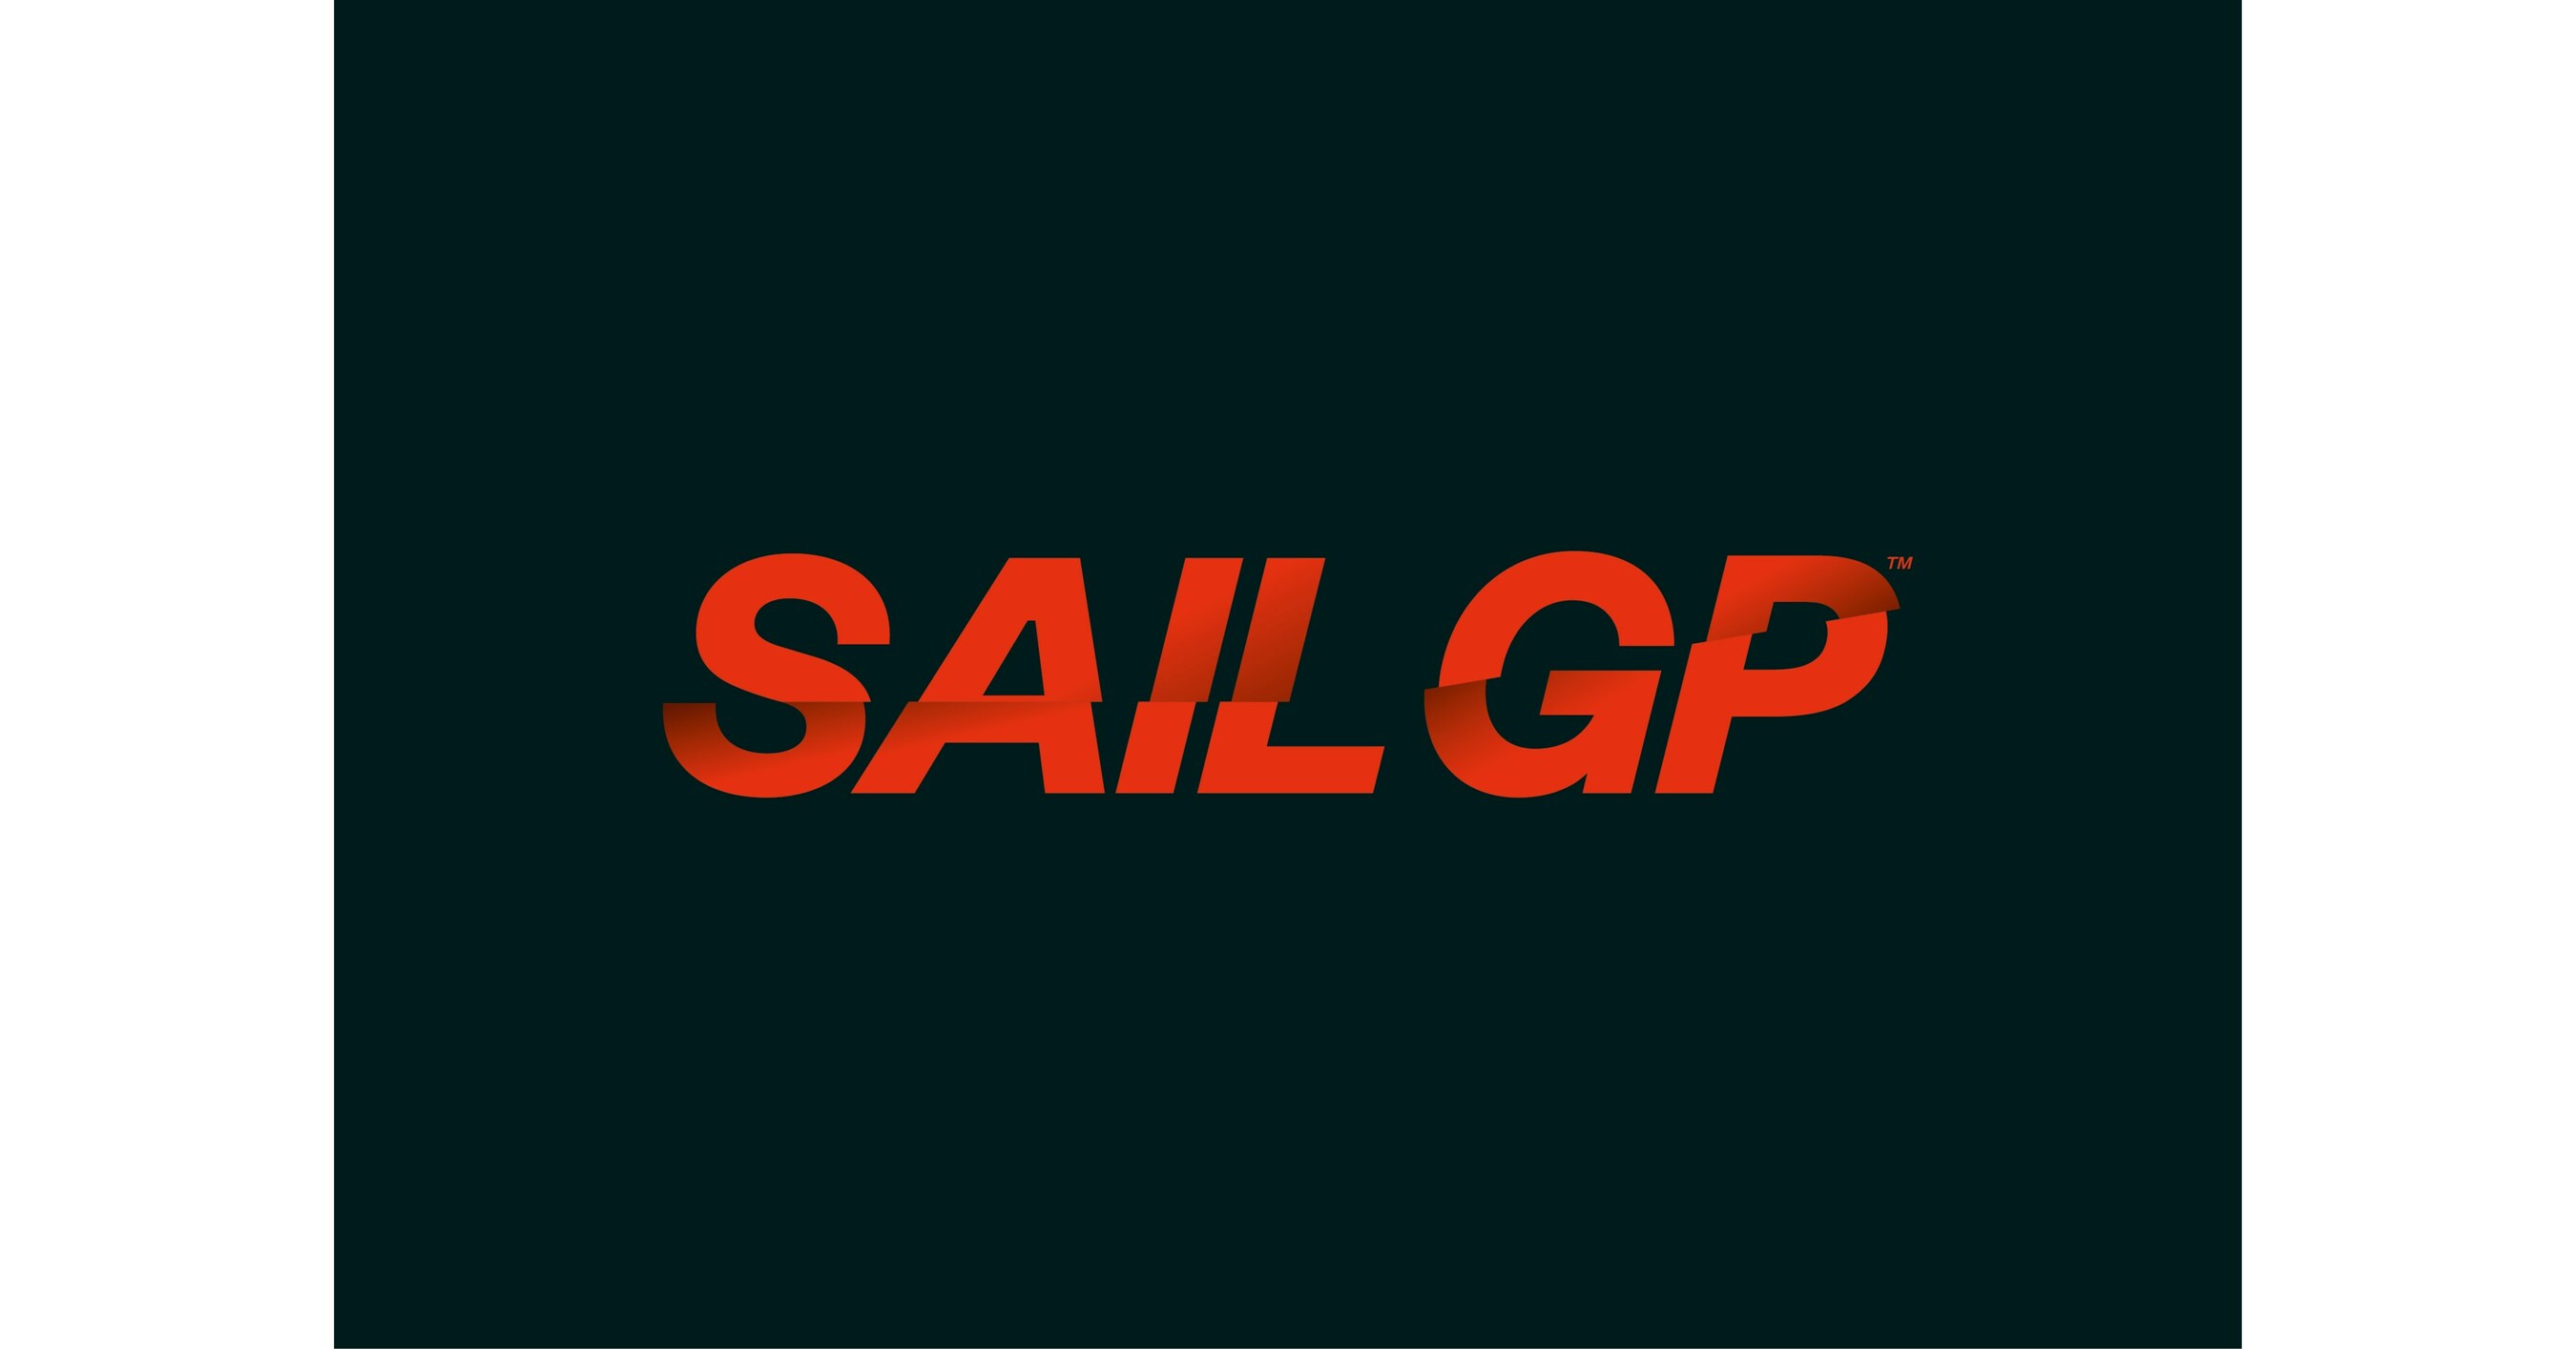 Sport, tech and entertainment leaders join forces to purchase the United States SailGP Team